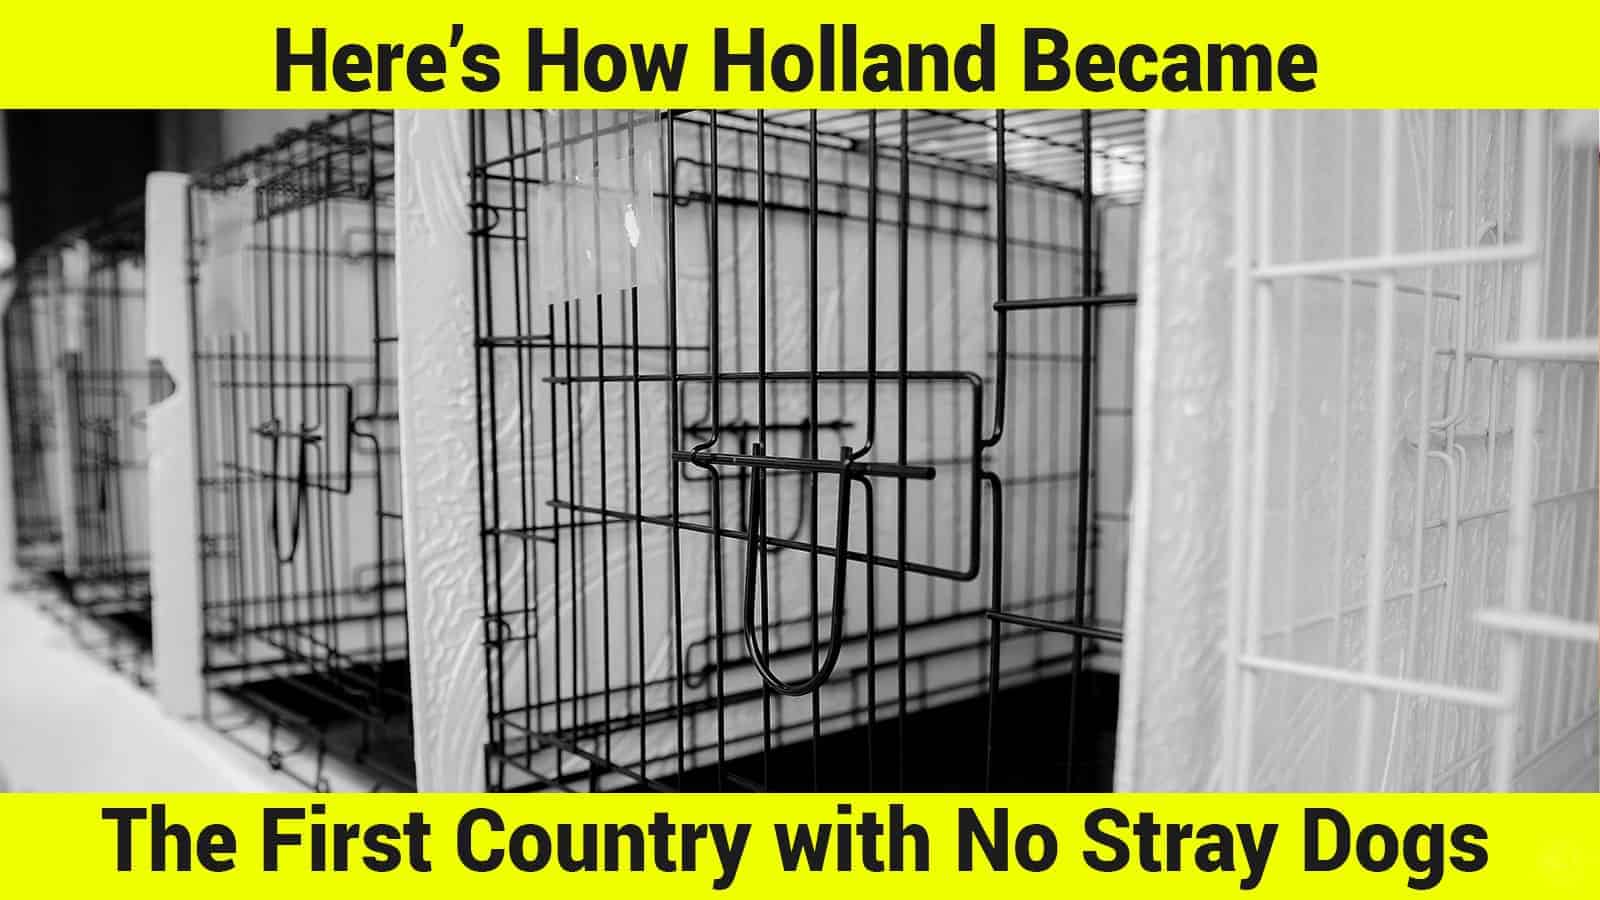 Here’s How Holland Became The First Country with No Stray Dogs